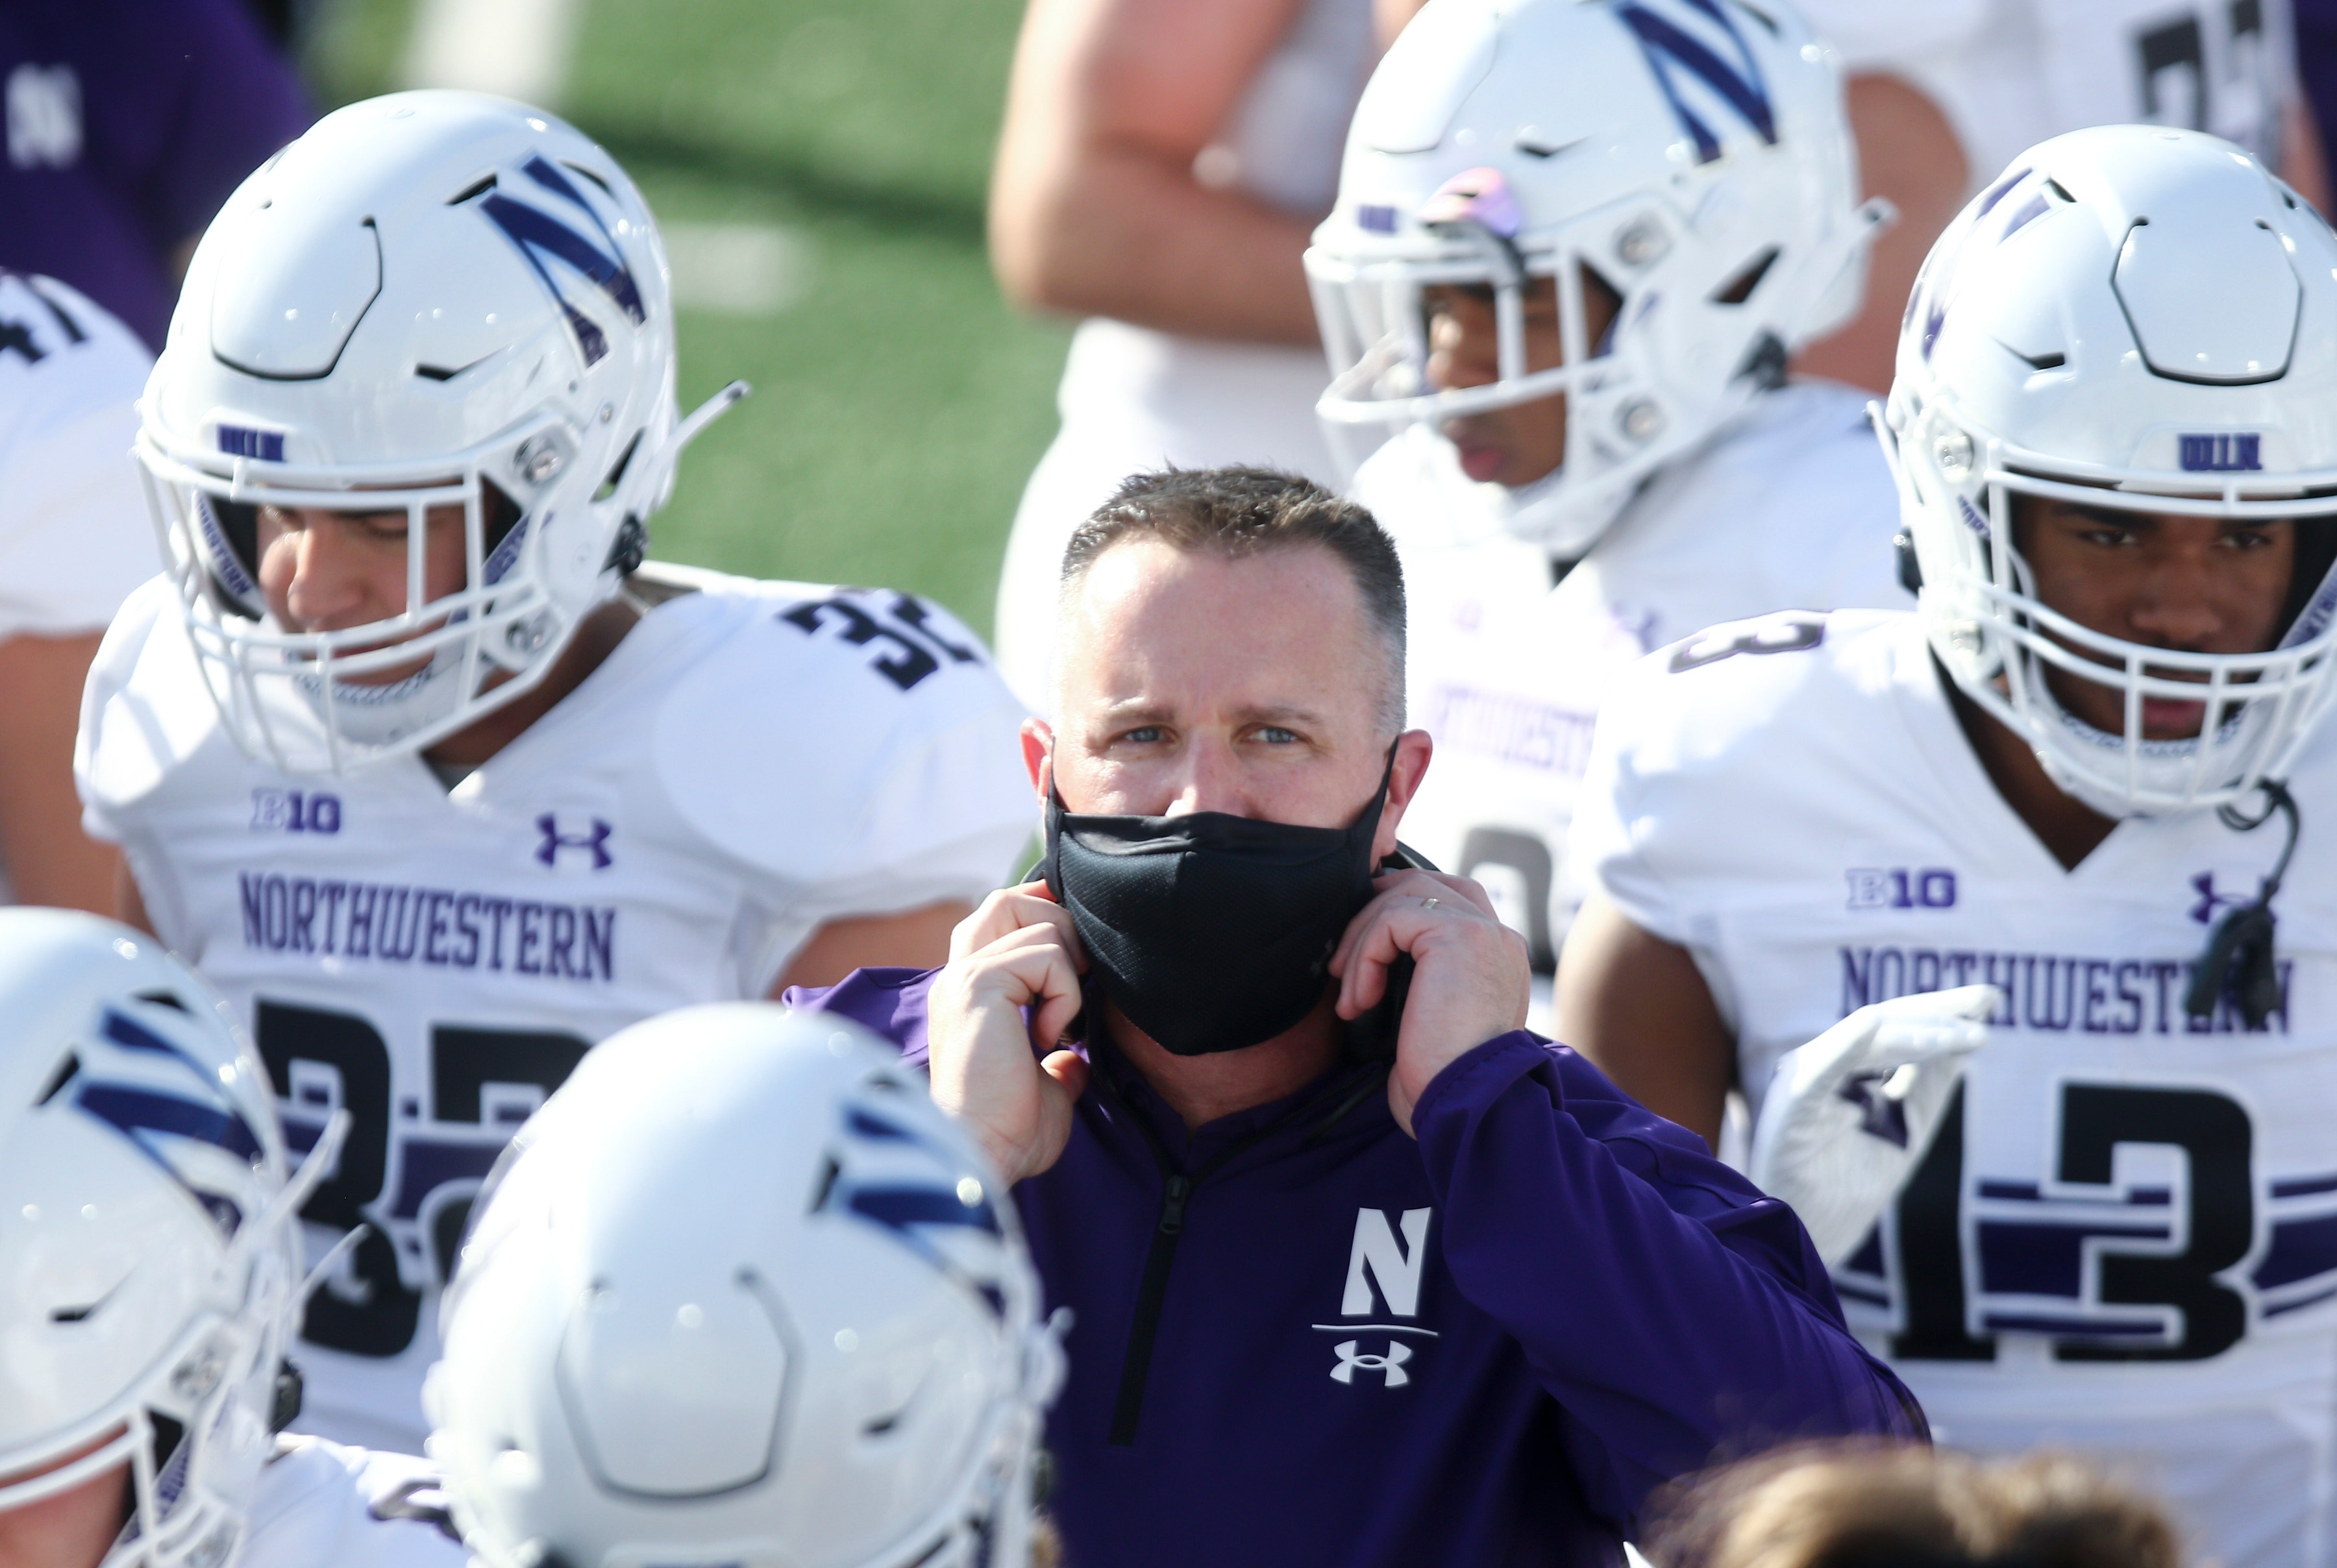 Northwestern football game disrupted when defund the police protesters storm field